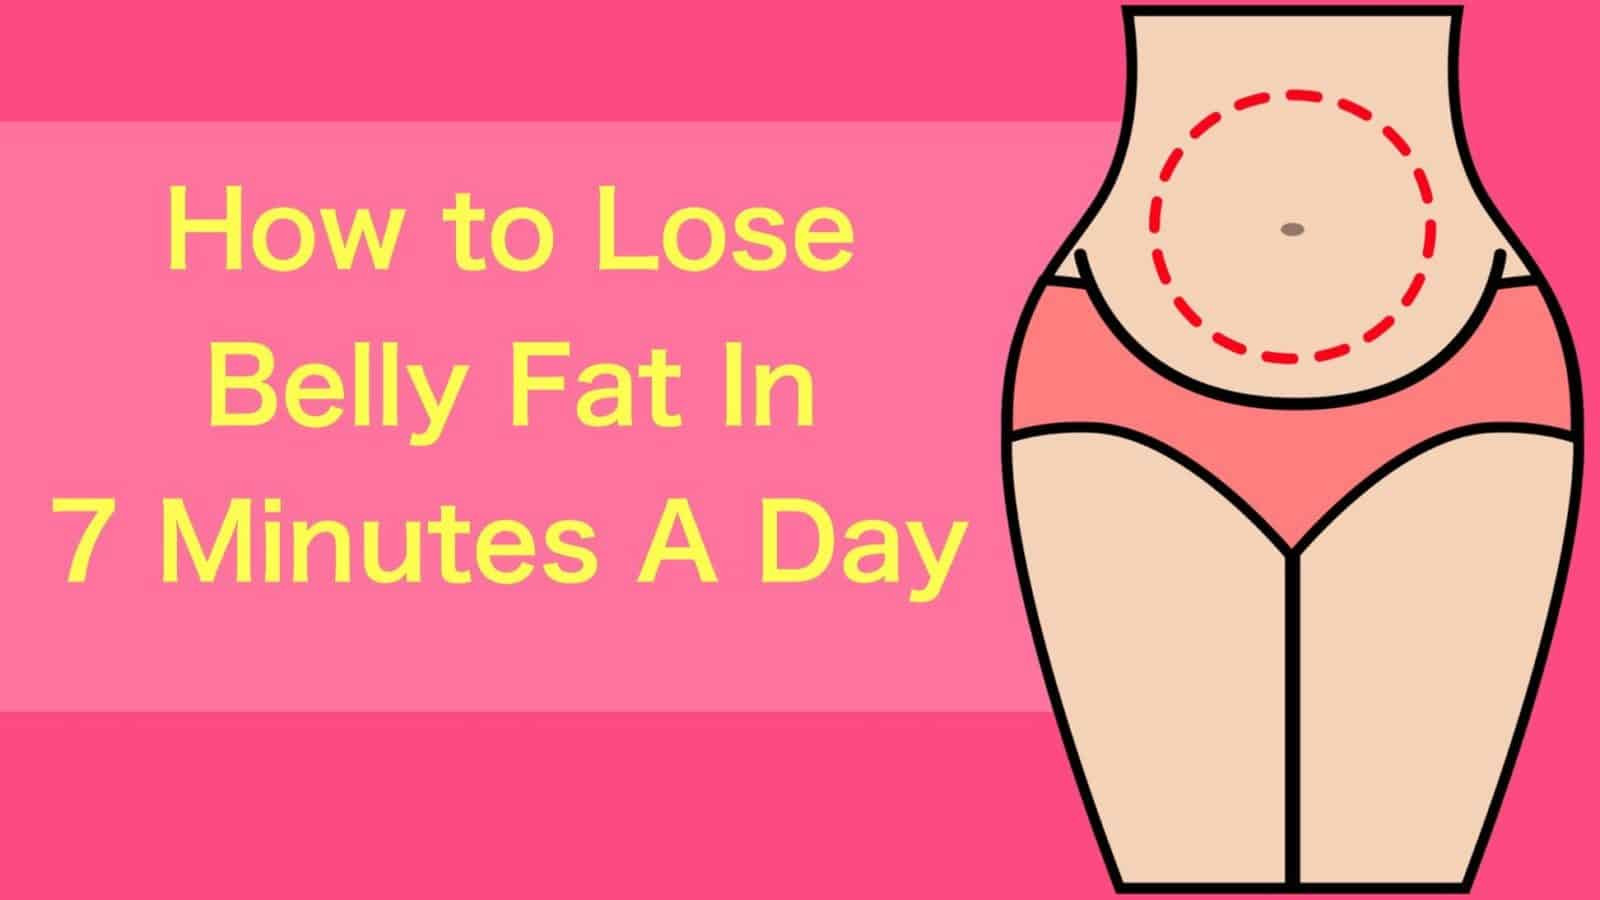 How To Lose Belly Fat In A Day
 How to Lose Belly Fat In 7 Minutes A Day